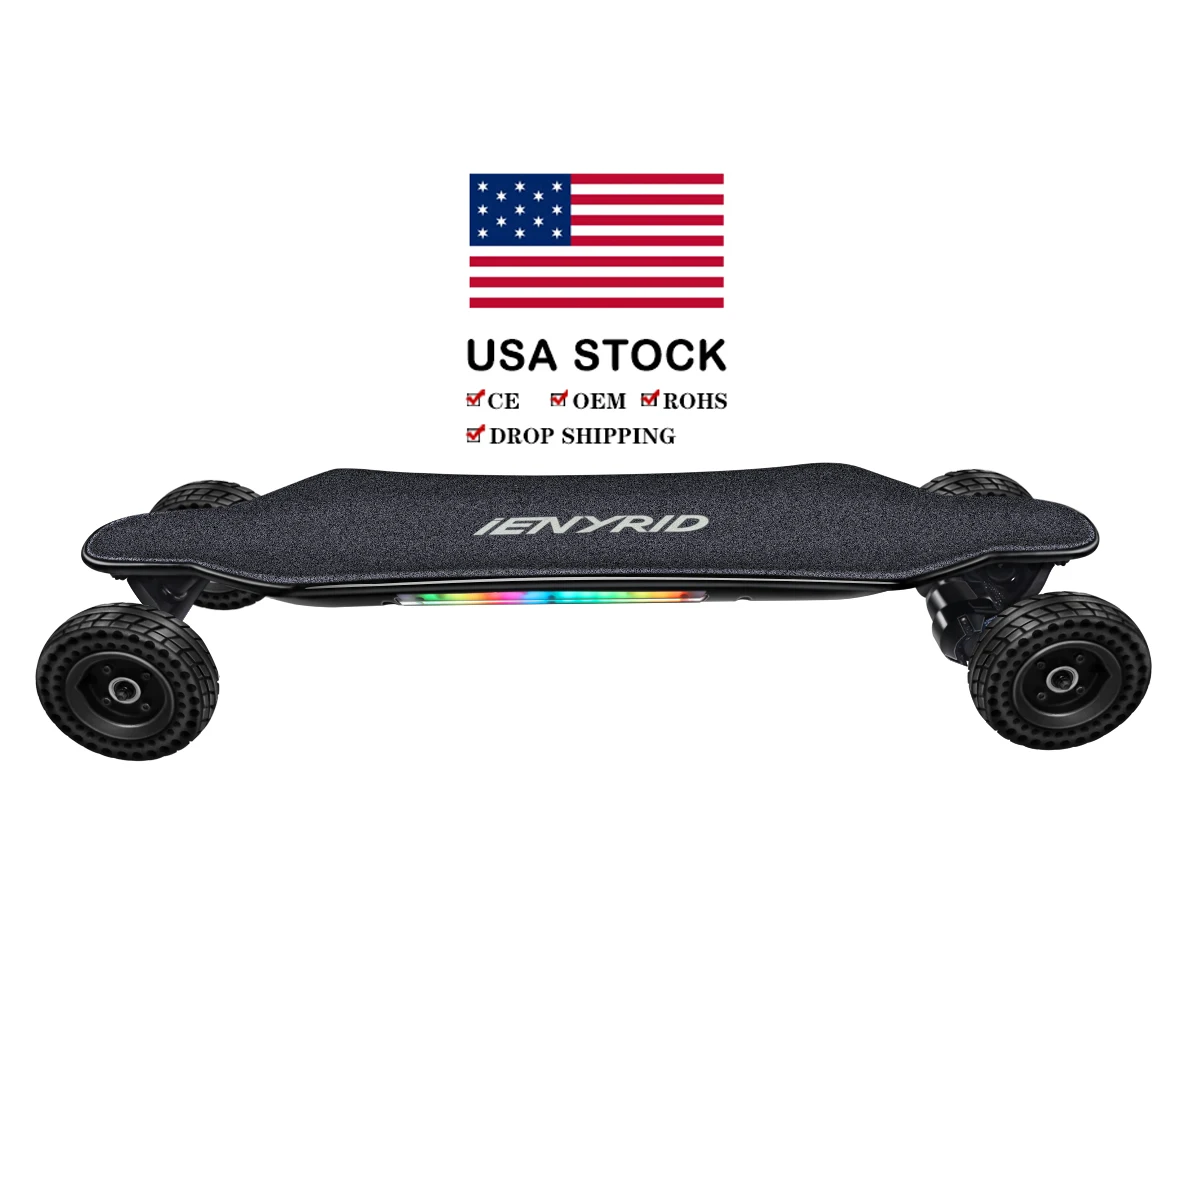 Directly Wholesale electric mountainboard 38km/h CE RoHS OEM Complete Skateboard for Kids Teens Adults, White / black / red